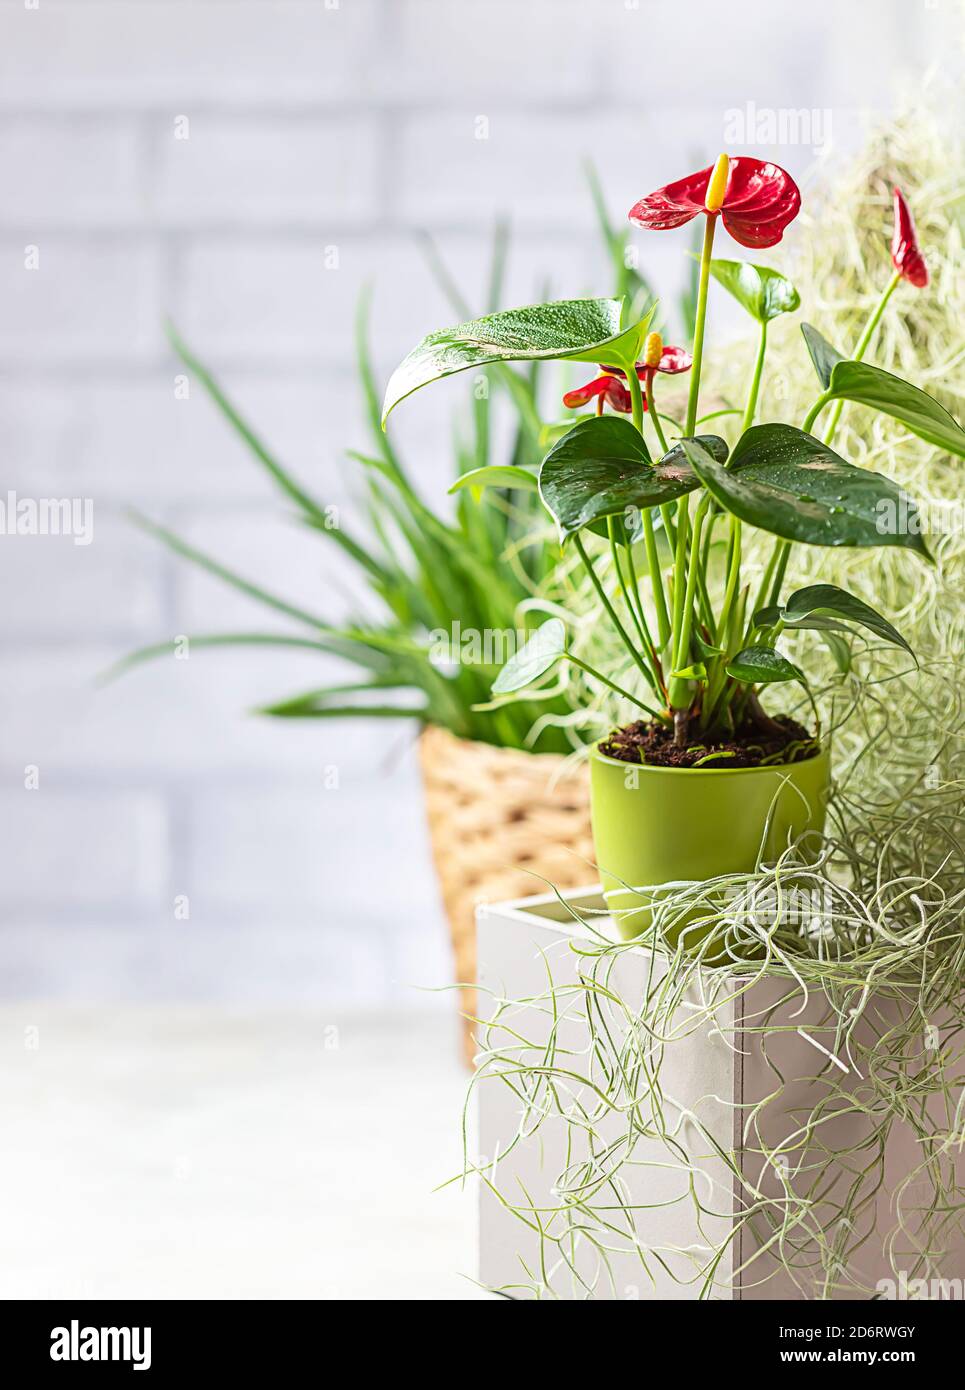 Various beautiful houseplants in pots on a light background. Blooming anthurium, fern, aloe. Stock Photo